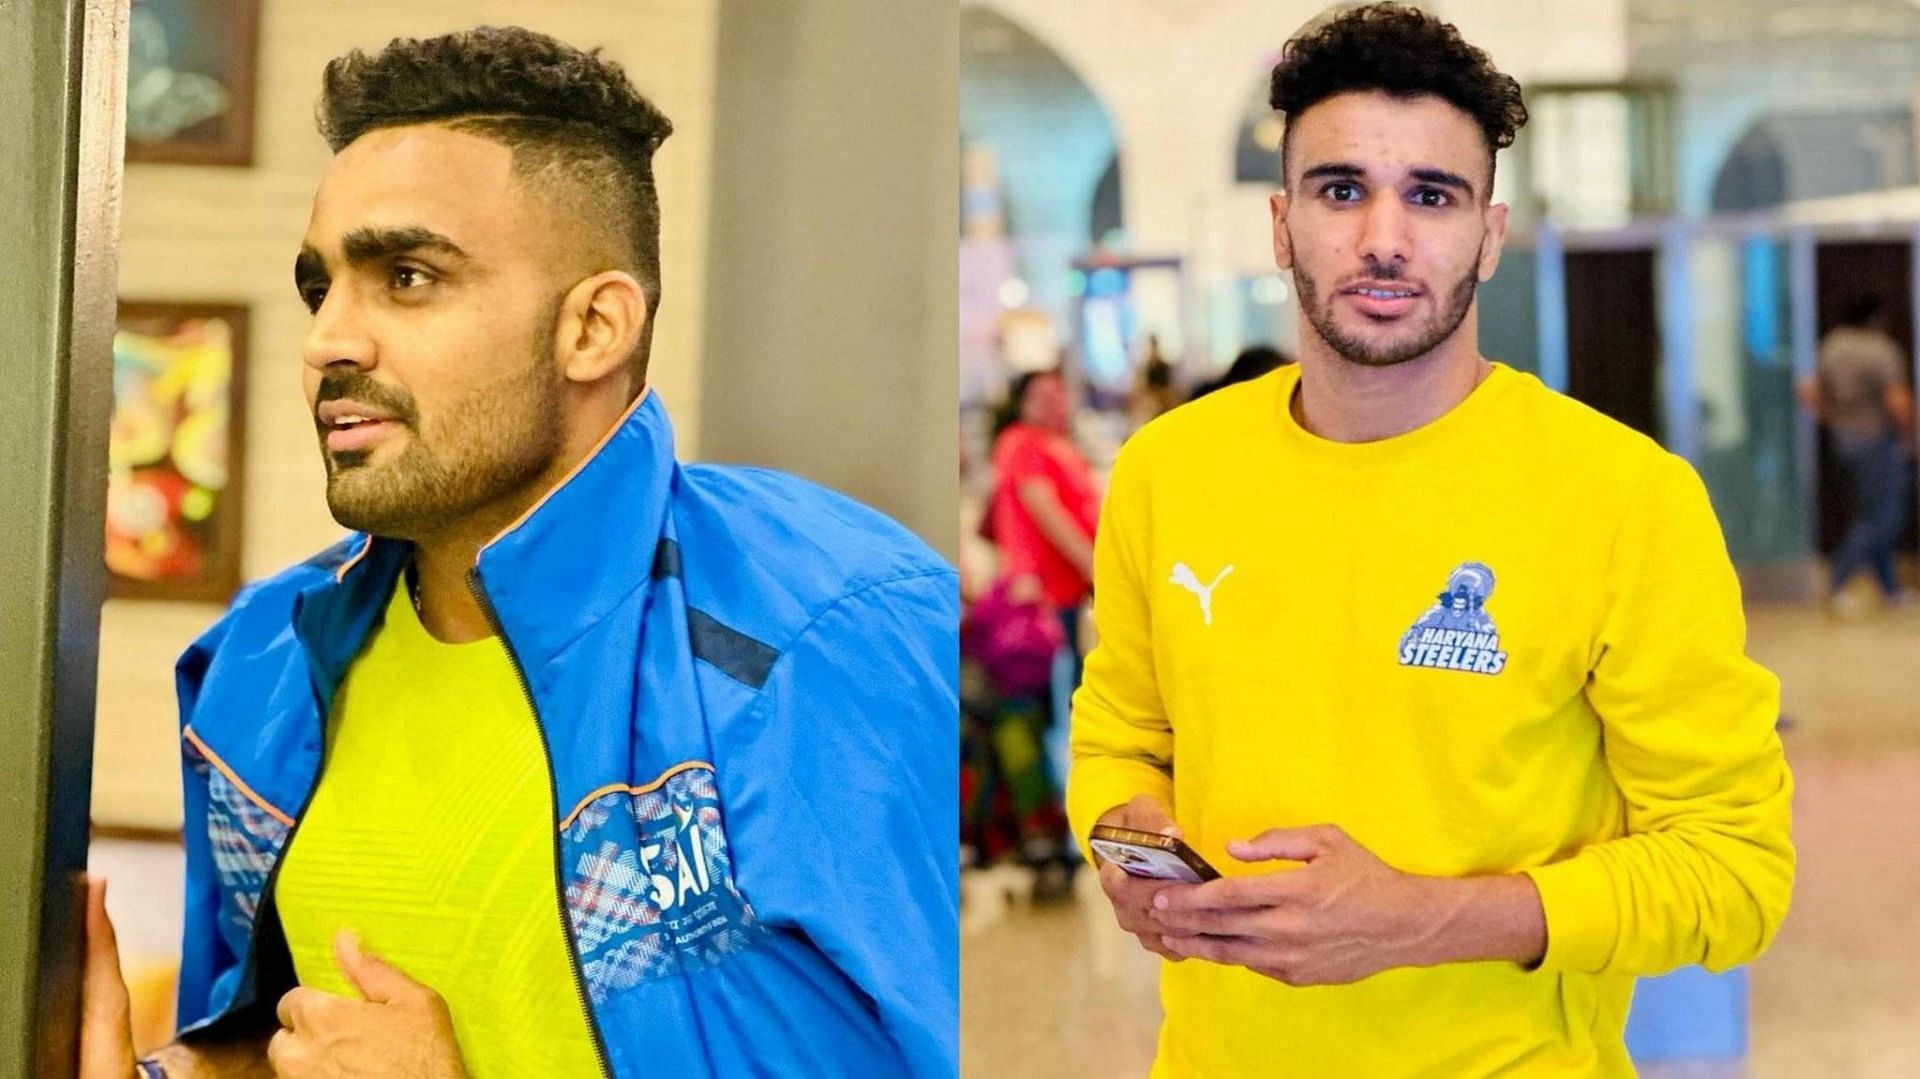 Haryana Steelers will play under the captaincy of Jaideep and Mohit (Image: Instagram)